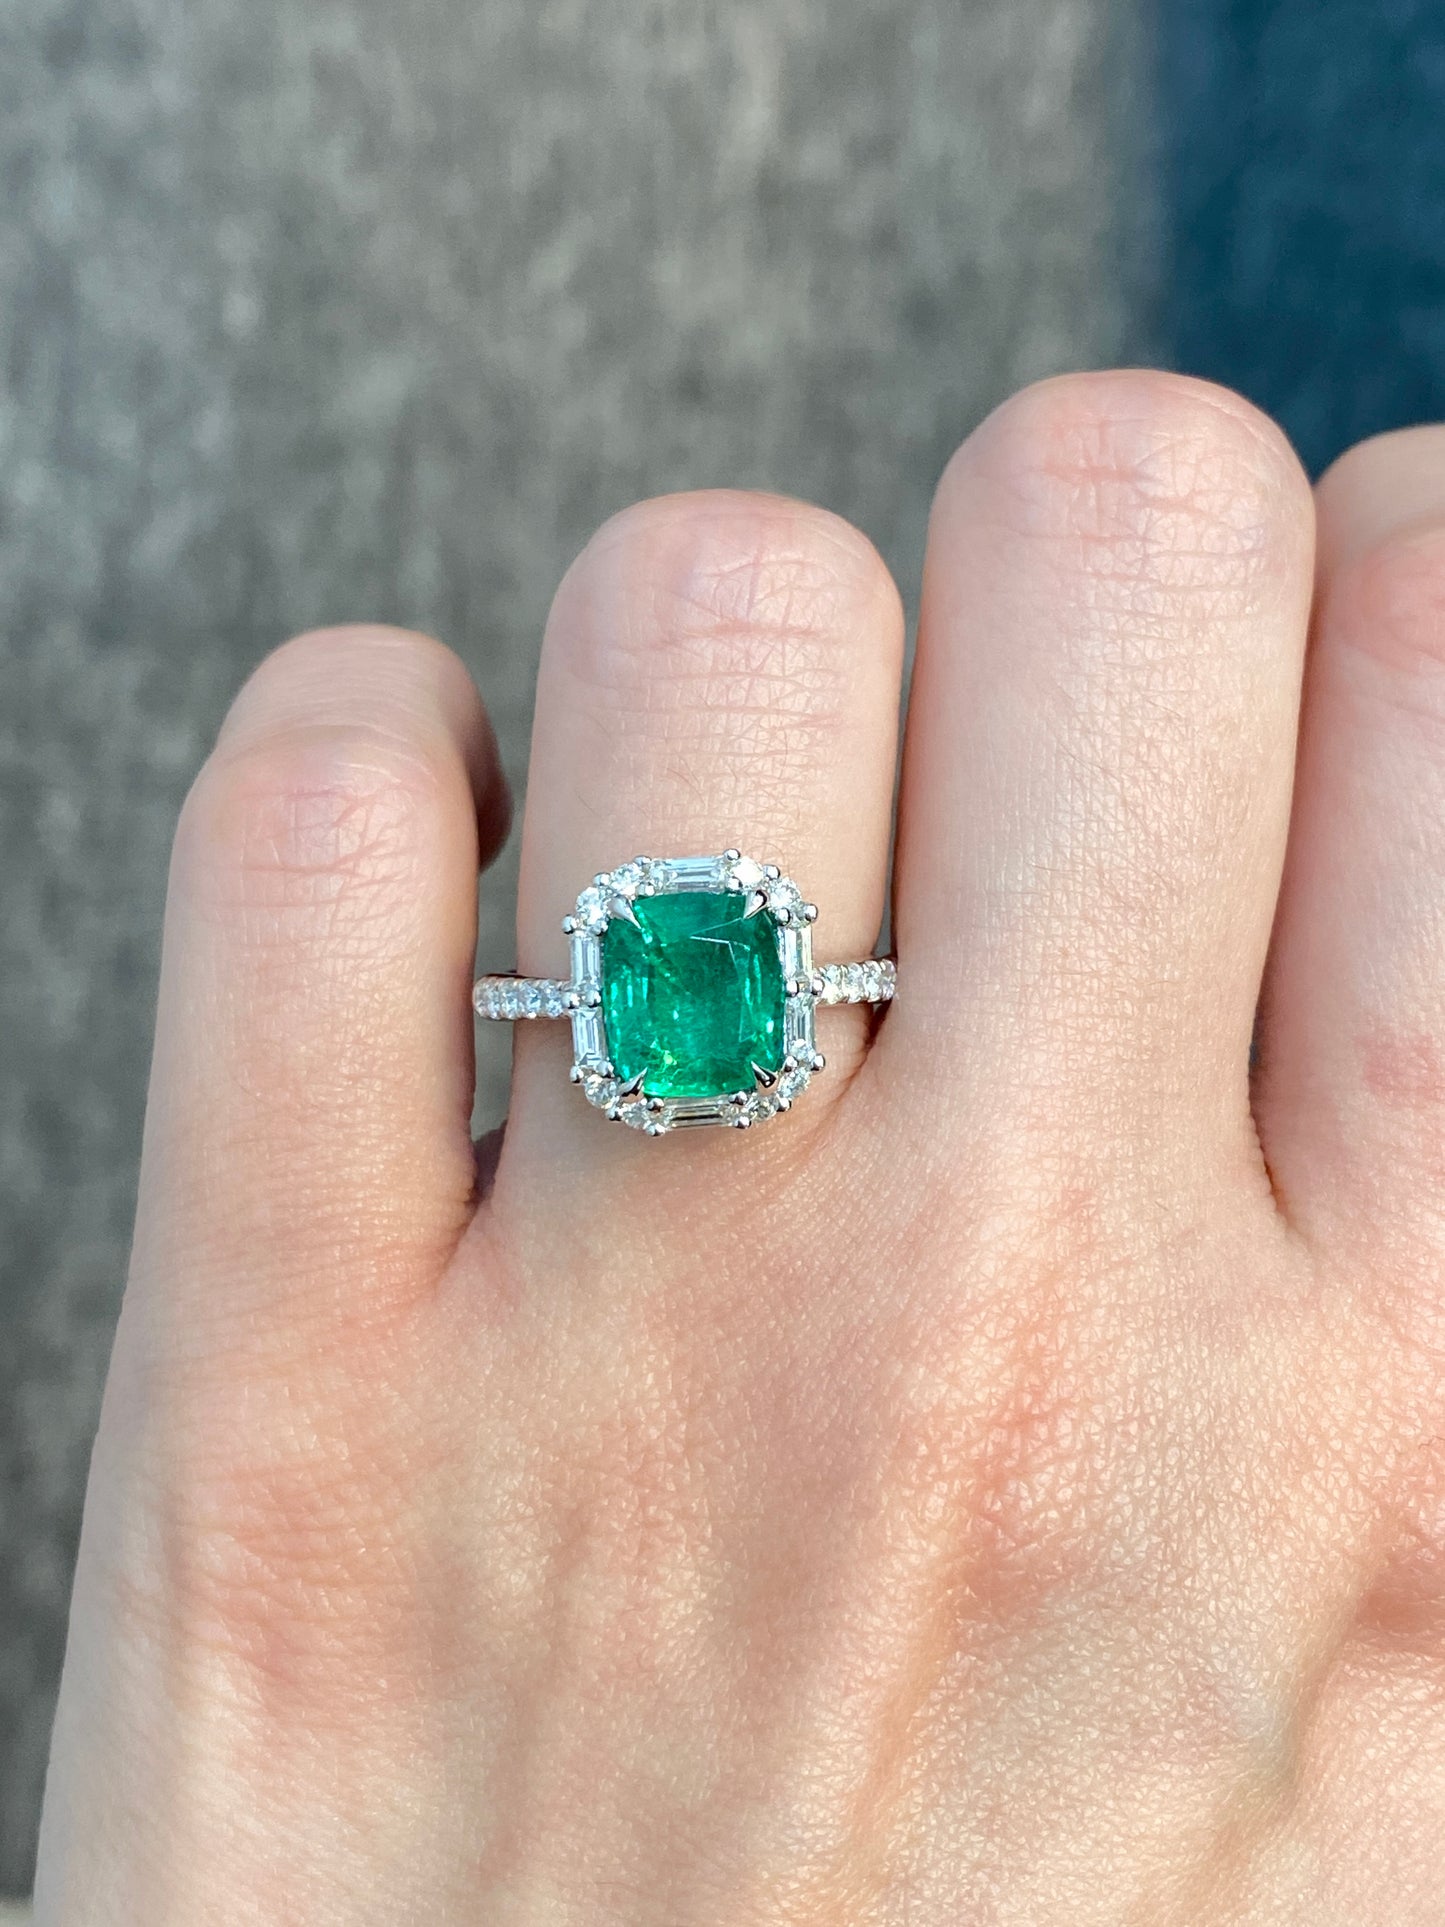 Natural Emerald 2.33ct Ring set with Natural Diamonds in 18K White Gold Singapore Gemstone Fine Jewelry